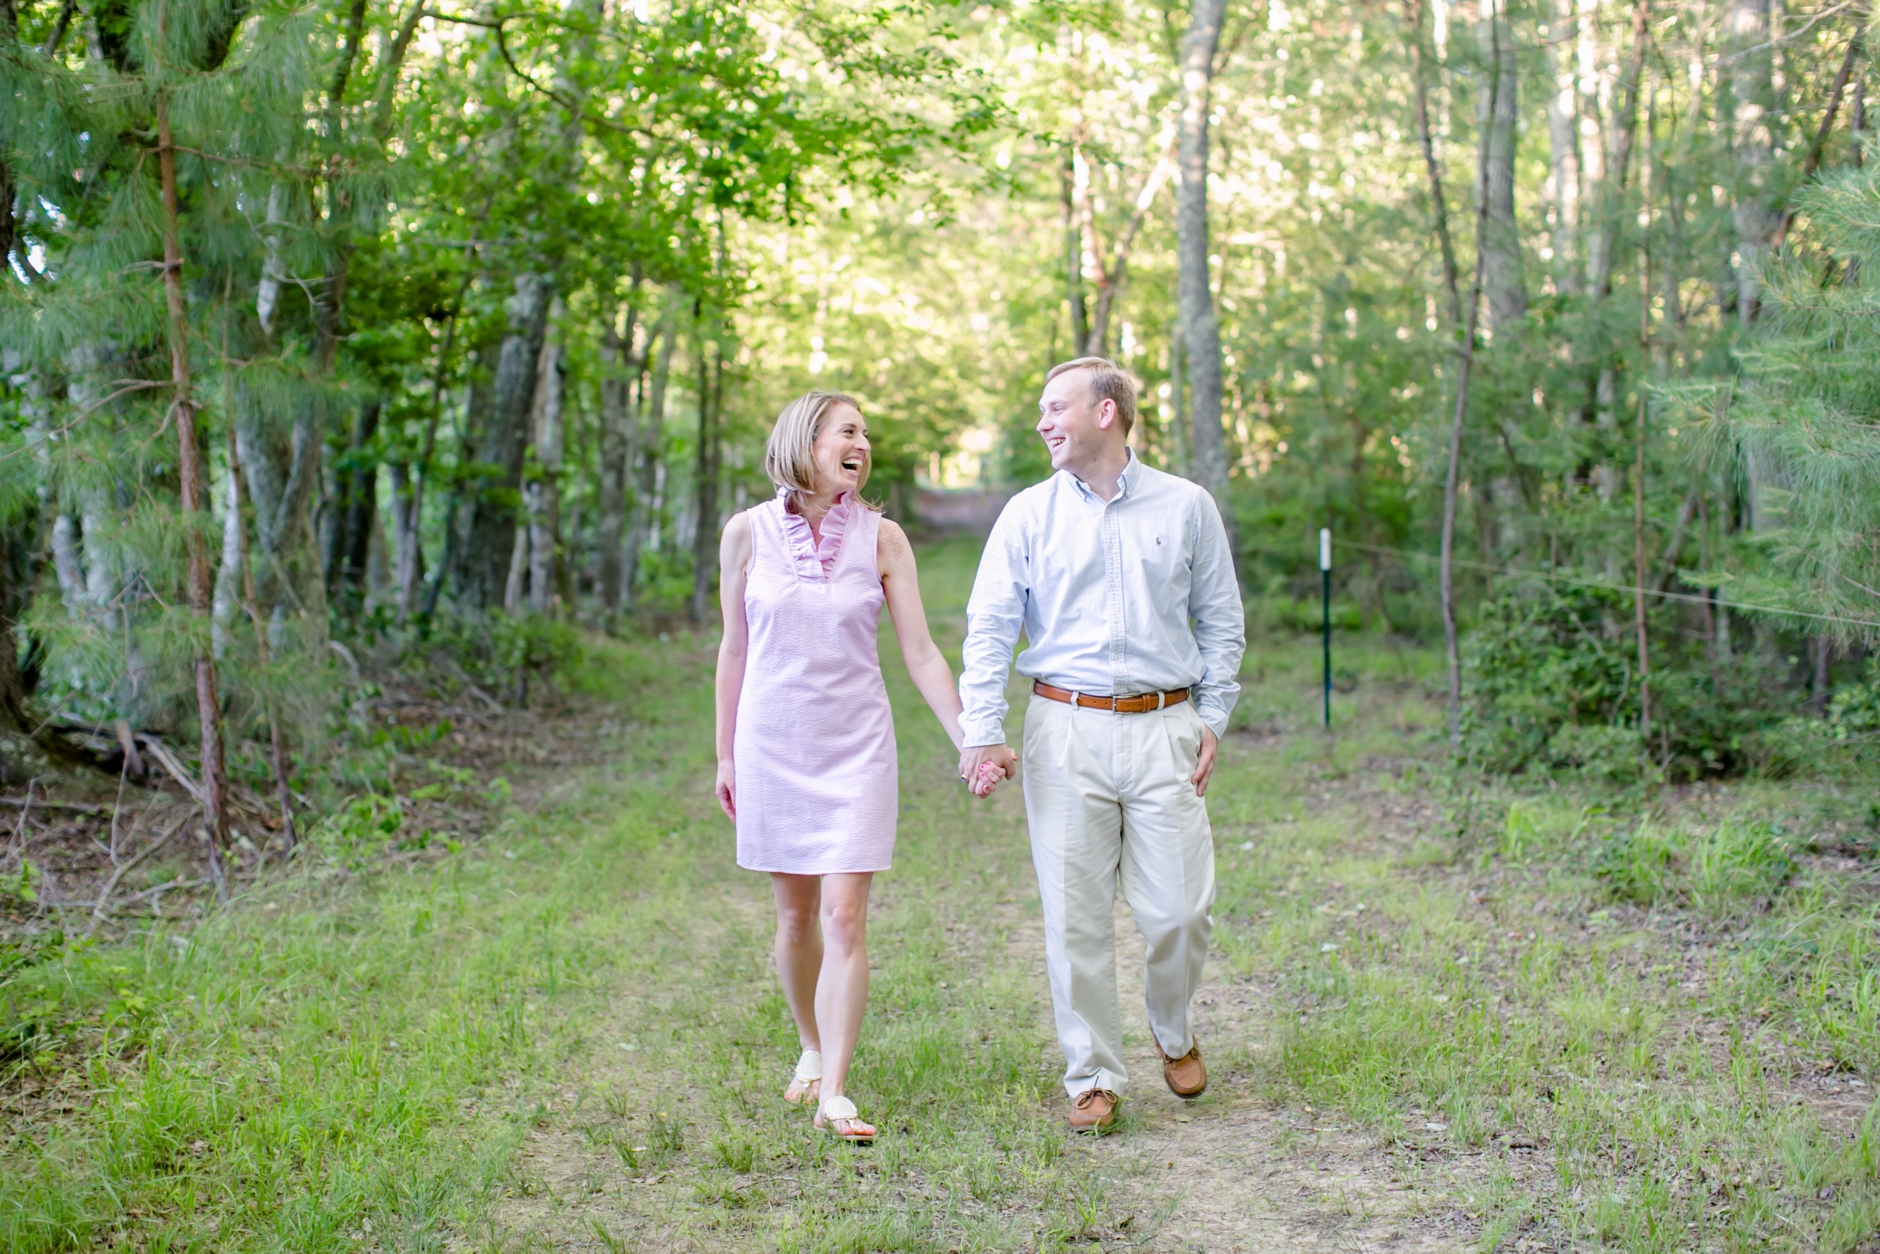 20A-King-George-Virginia-Engagement-1041